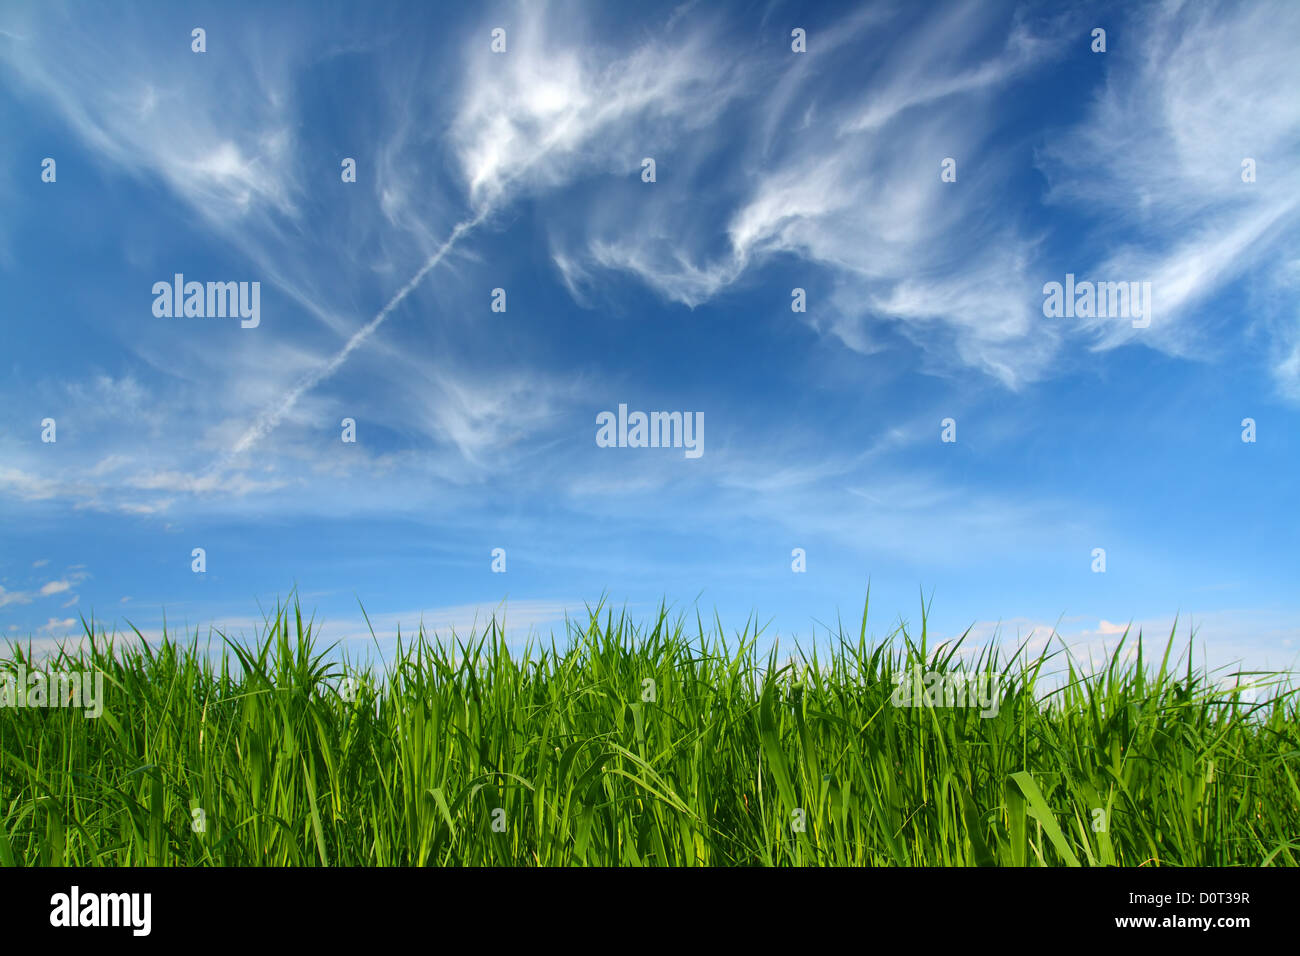 green grass under sky with fleecy clouds Stock Photo